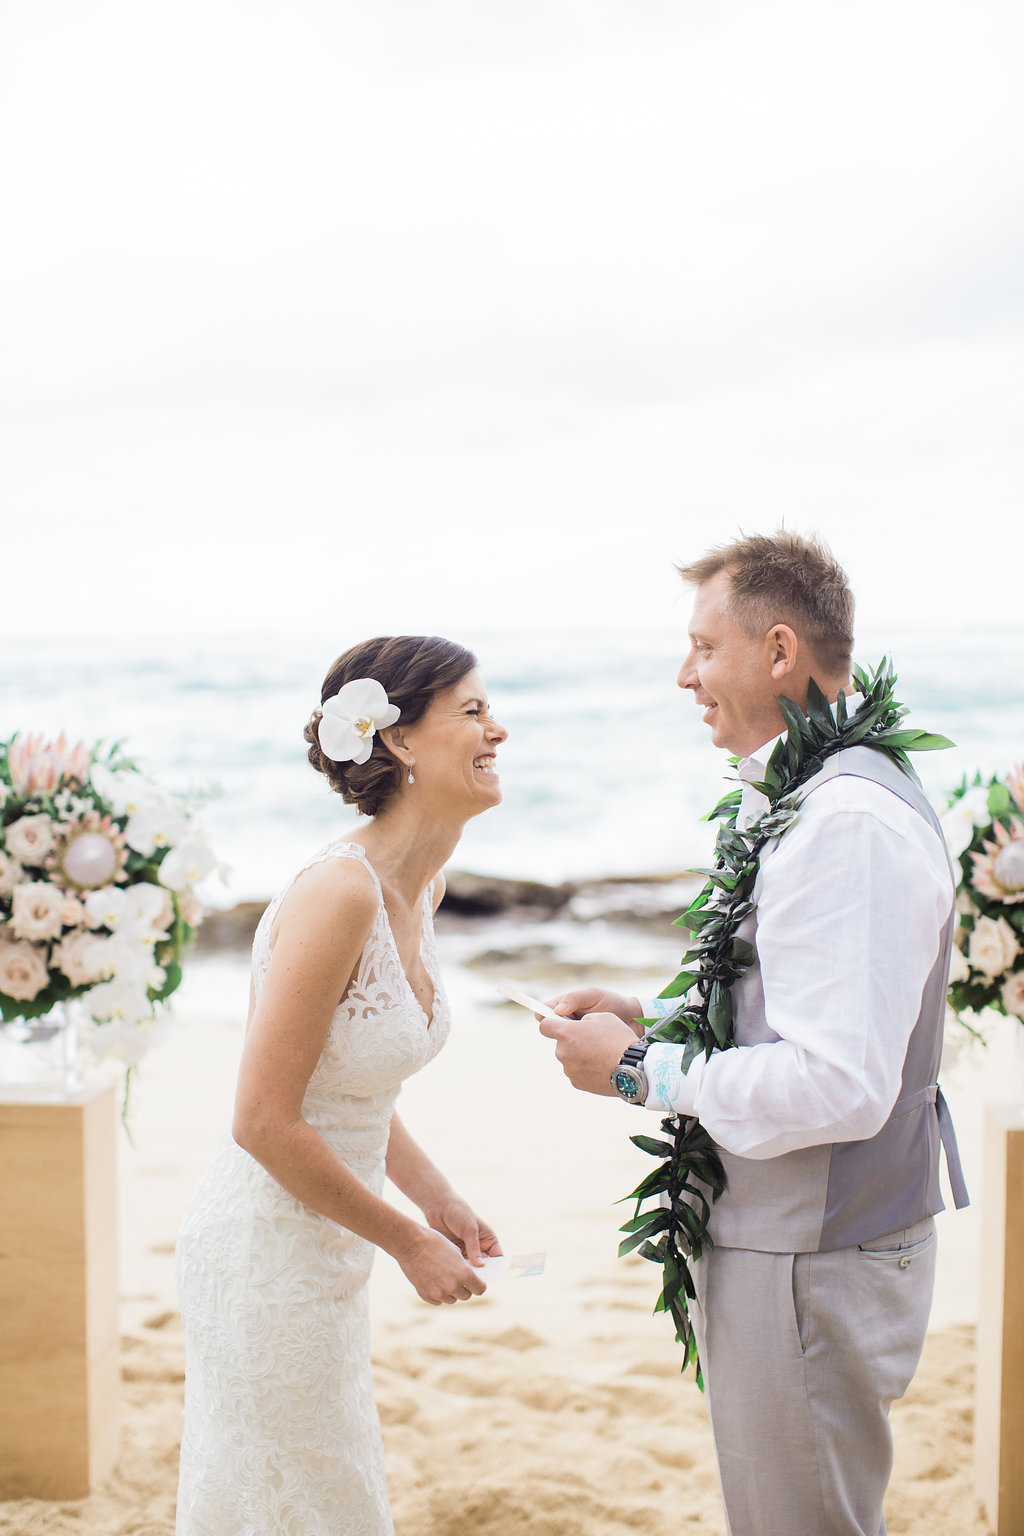 Saying Your Vows by Oahu's North Shore Waves — Modern Elopement & Micro ...